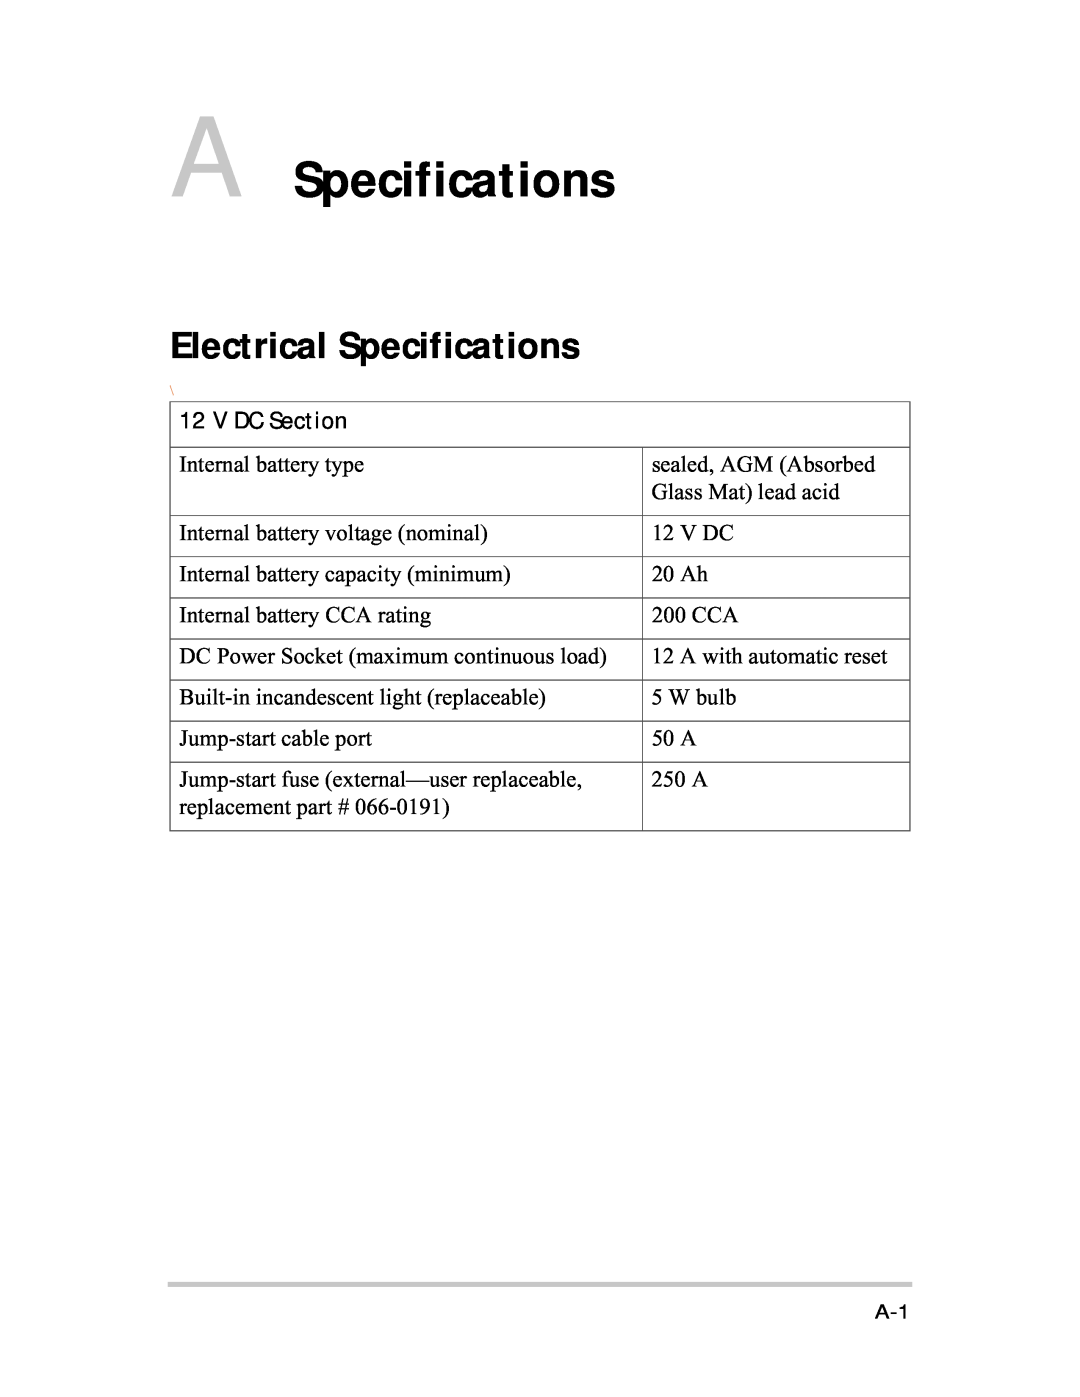 Xantrex Technology 400R manual A Specifications, Electrical Specifications, V DC Section 